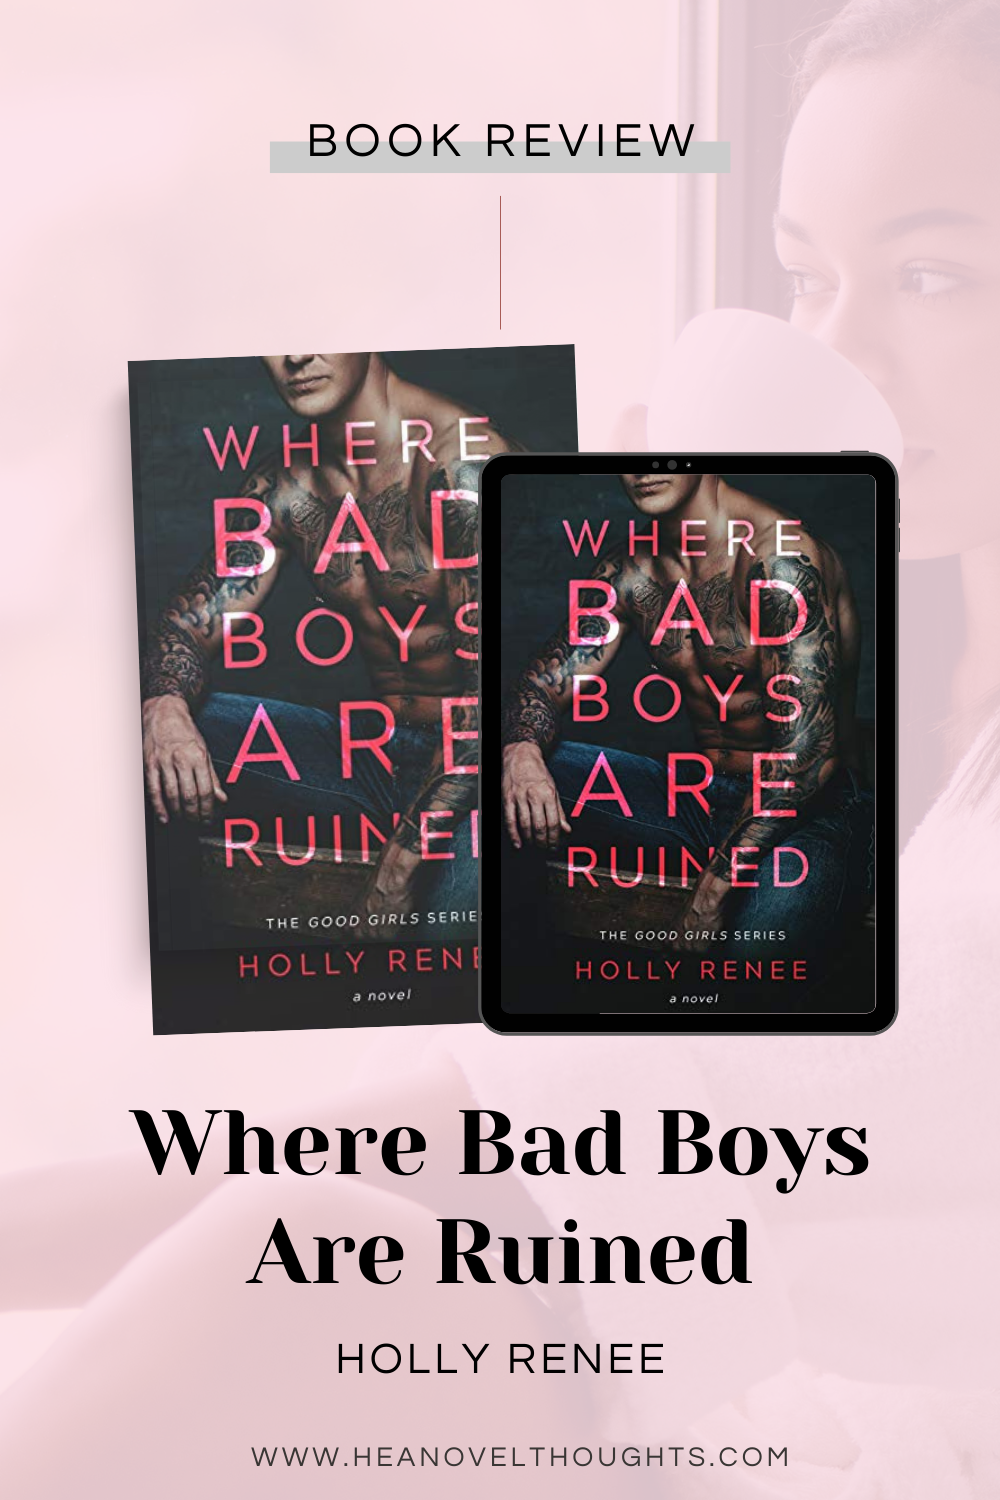 Where Bad Boys are Ruined by Holly Renee